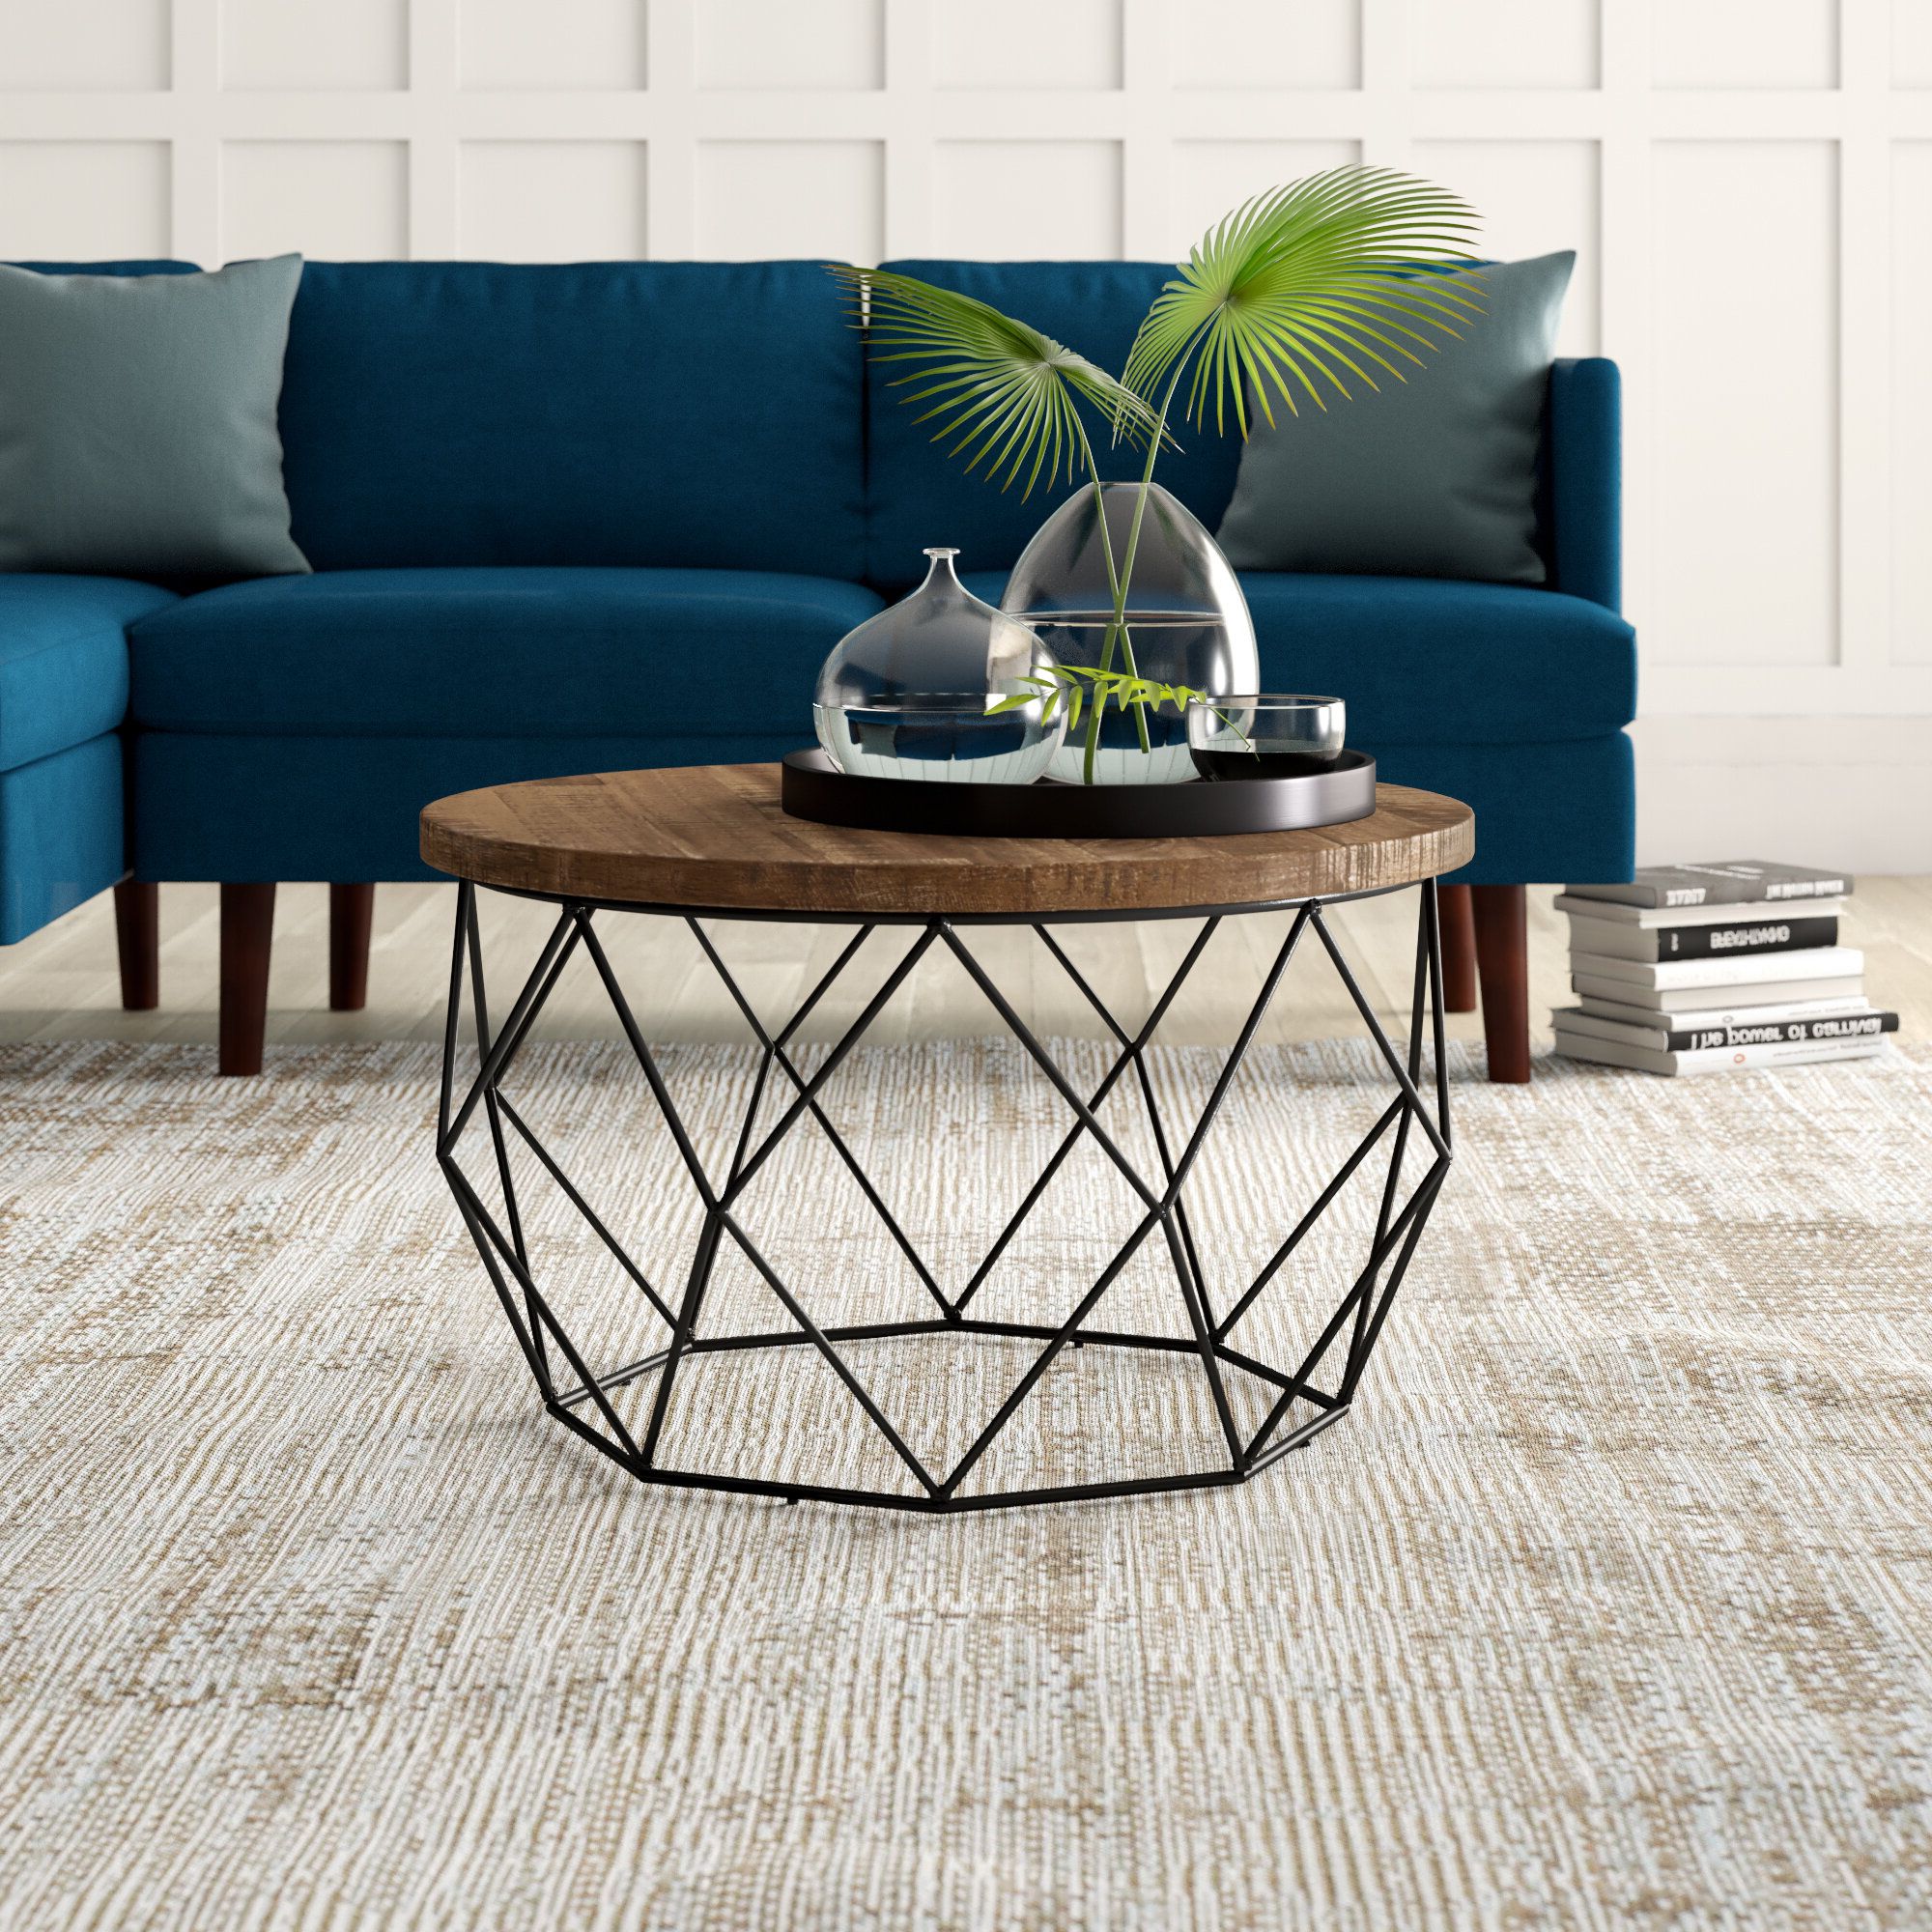 Medium Wood Coffee Tables You'll Love In  (View 3 of 20)